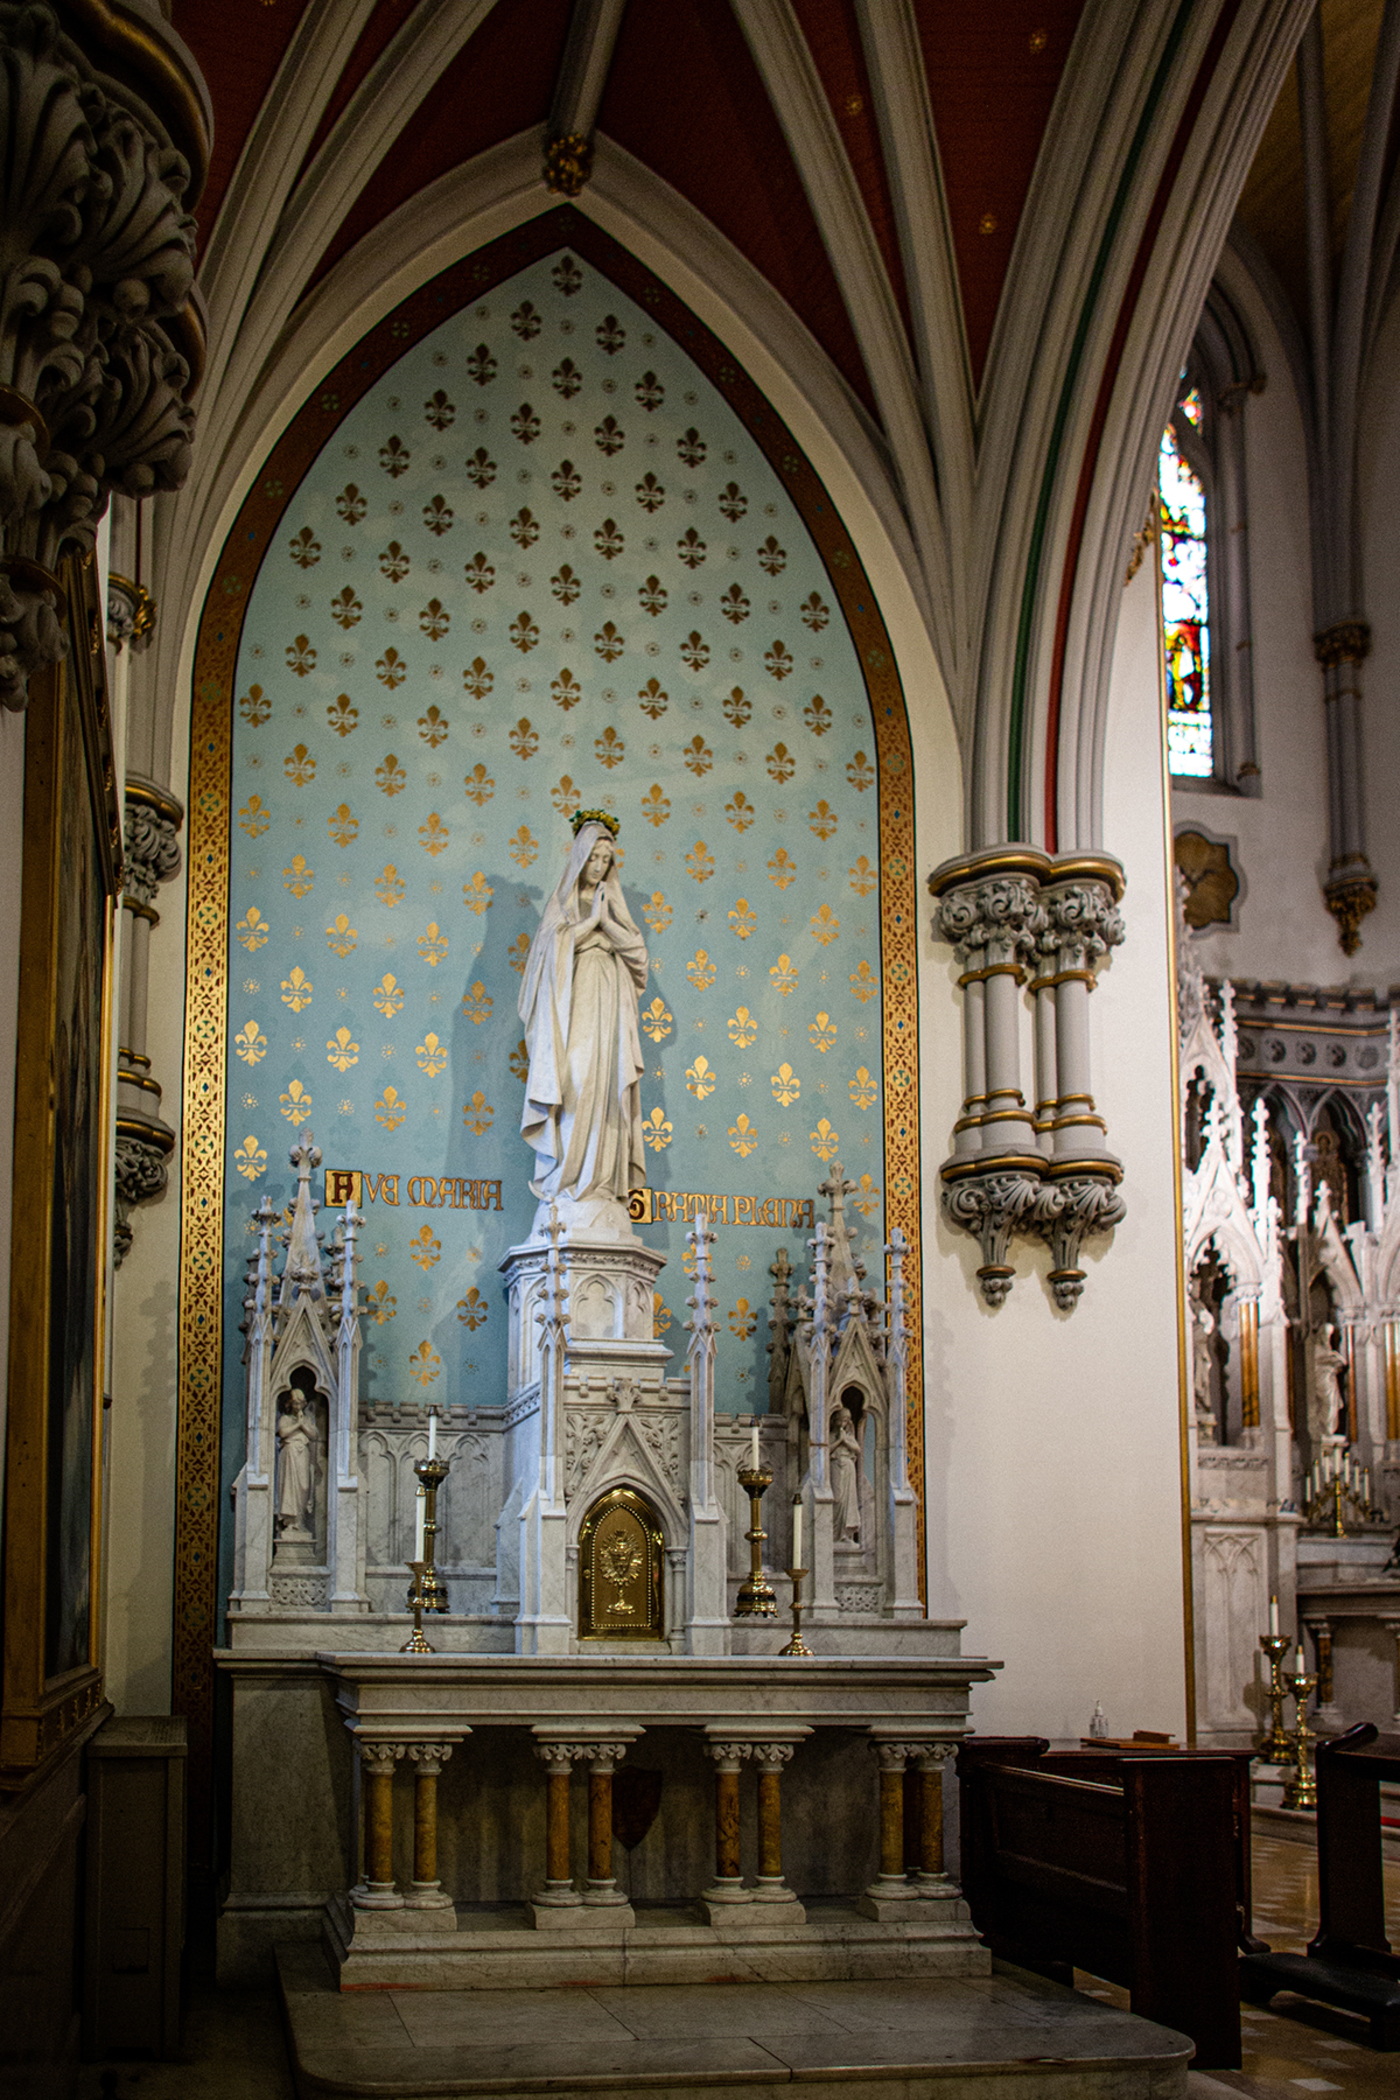 altar to Mary at St. Francis Xavier church in Park Slope, Brooklyn